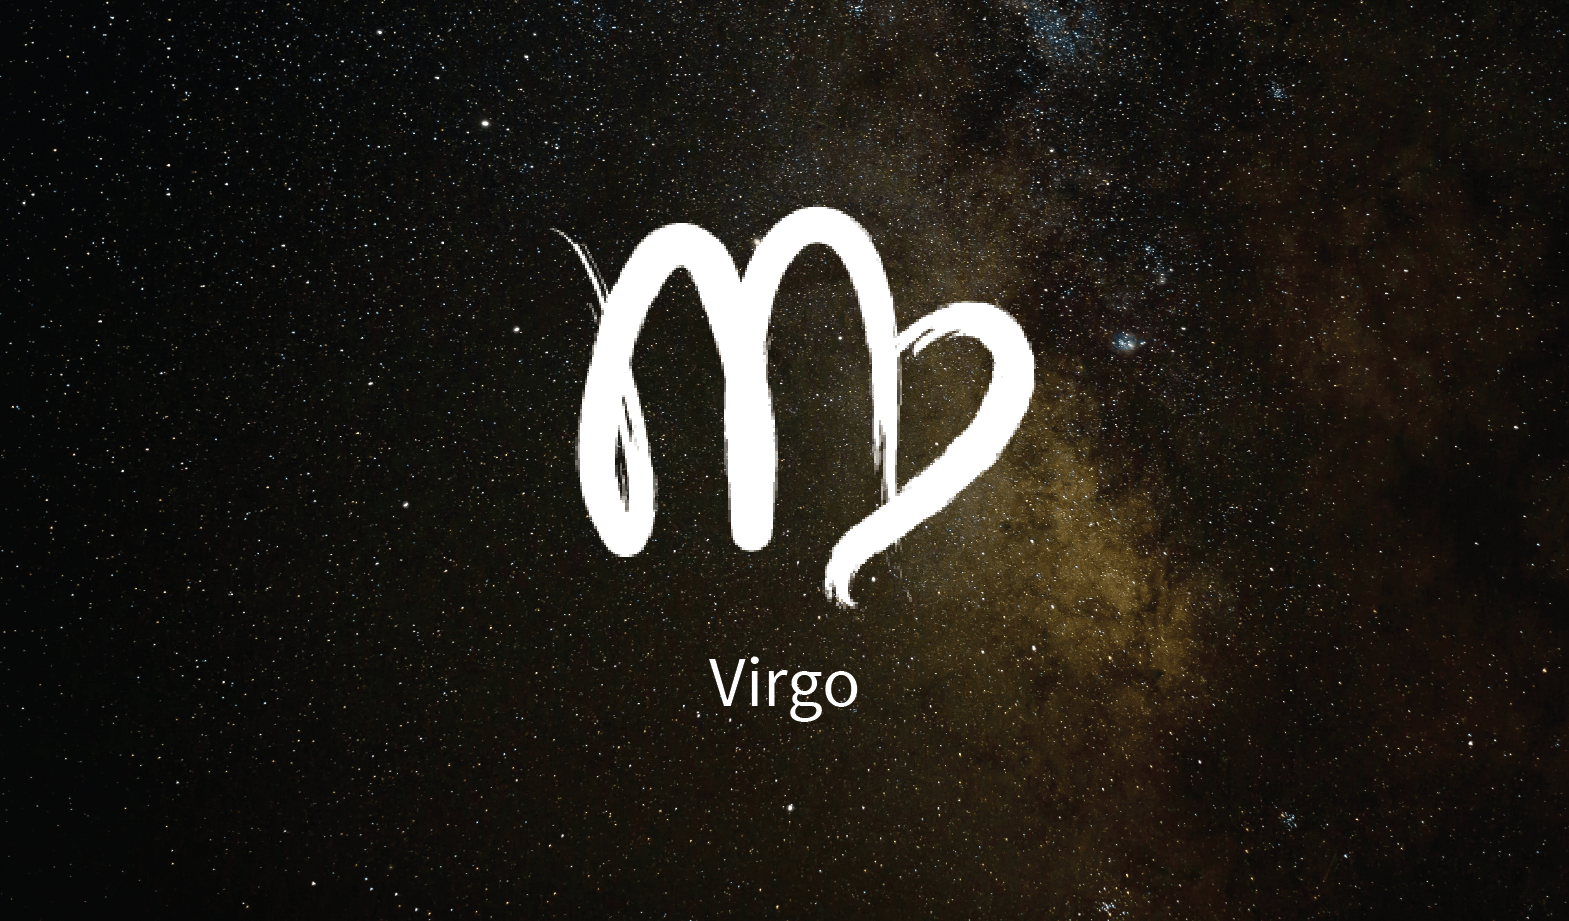 What Birthday Month Is Virgo